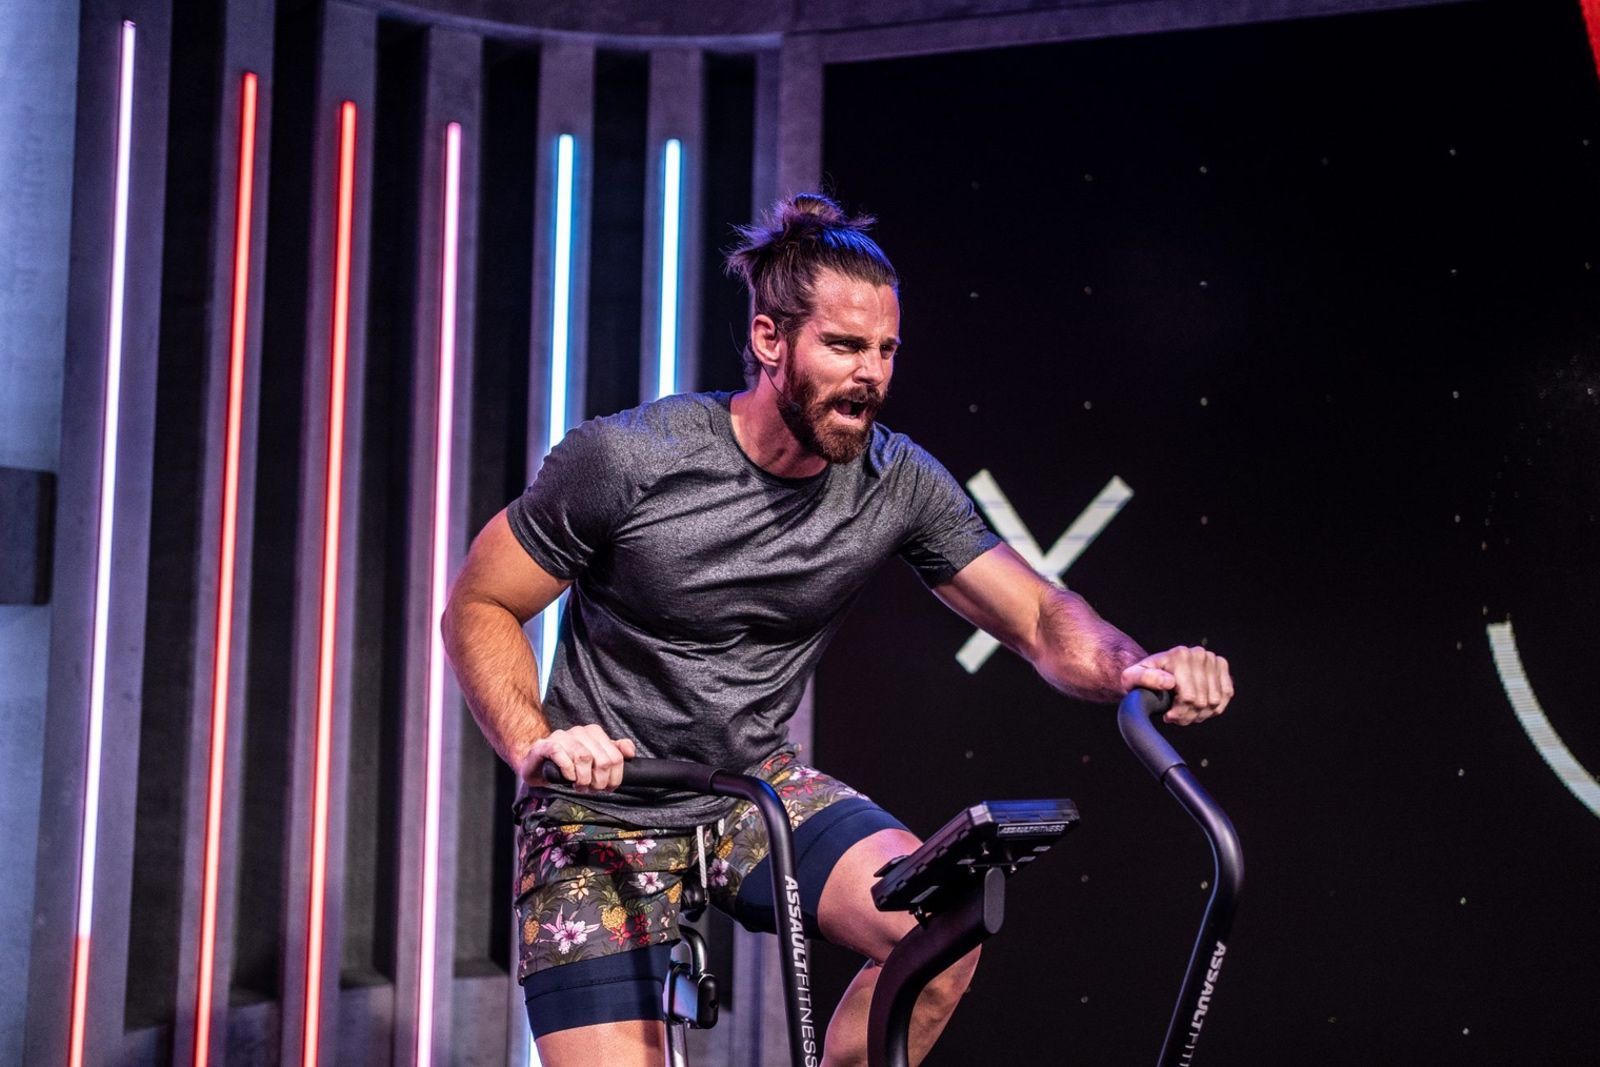 Home fitness platform Fiit muscles in on Peloton, teasing air bike workouts and Assault Fitness partnership photo 1